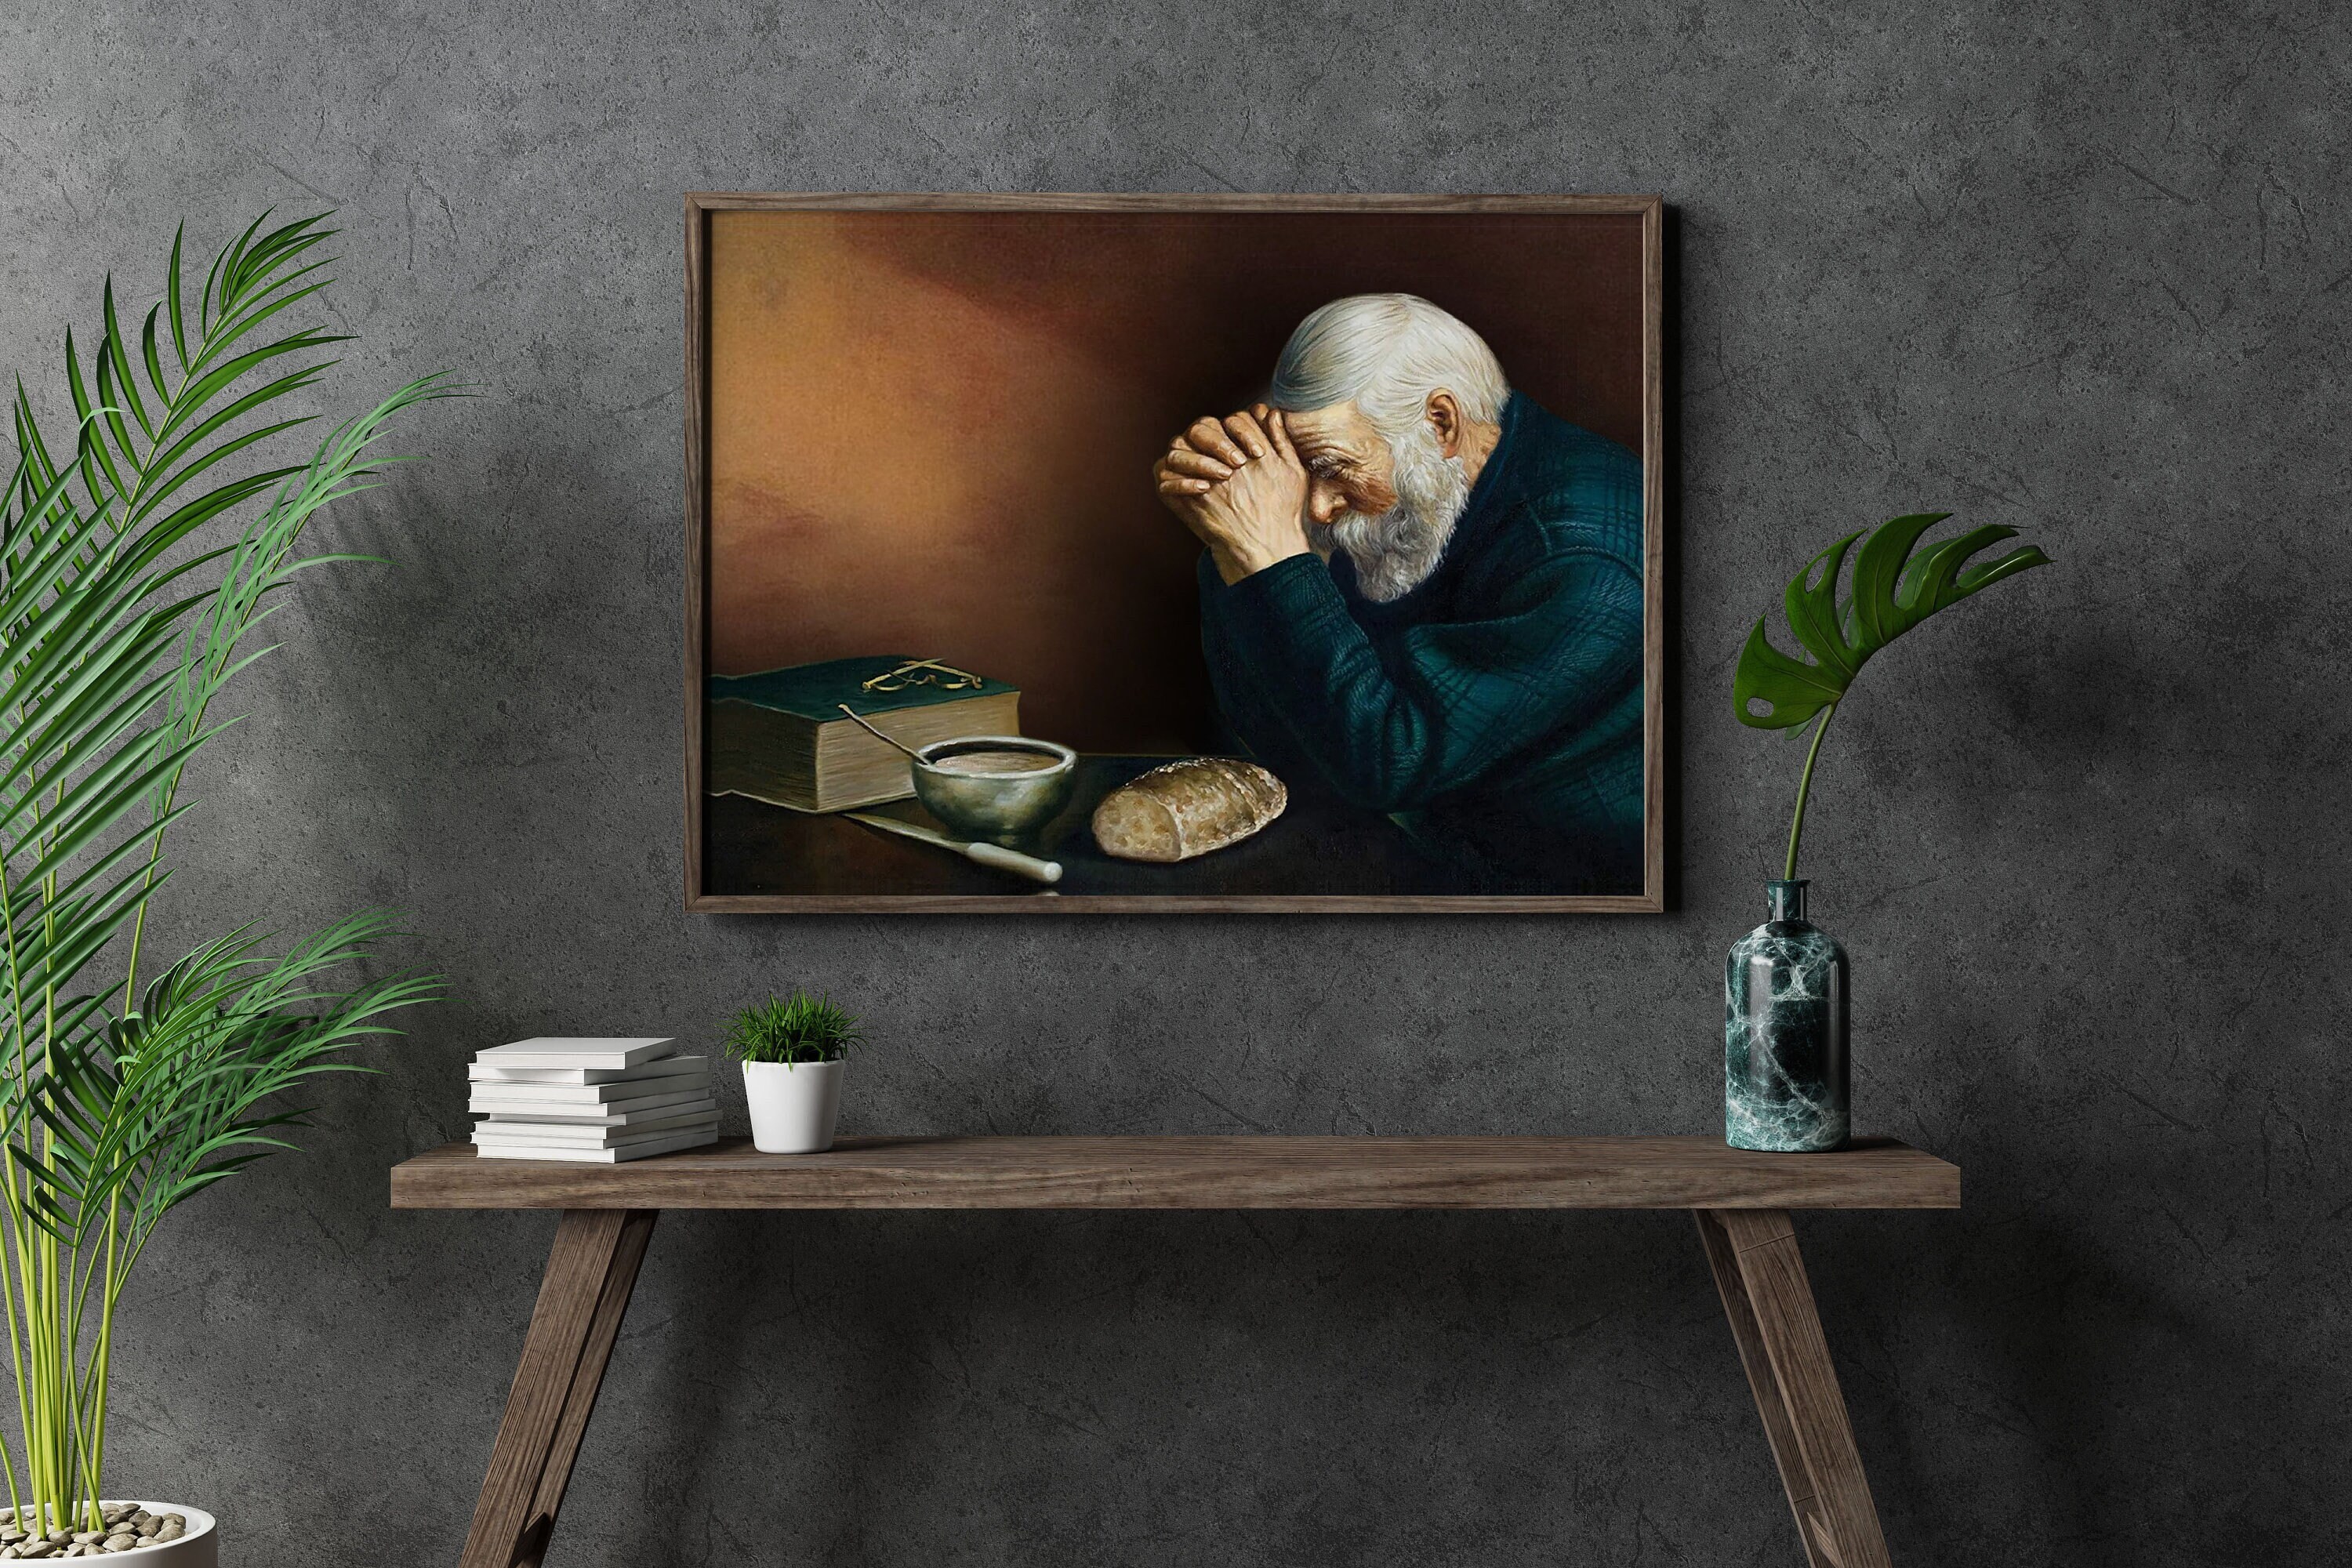 Daily Bread Man Praying Grace Thanksgiving at Dinner Table Grace Religious  Art Print 8x10 Black Frame + Glass Sentimental Gift Ready to Hang Overall